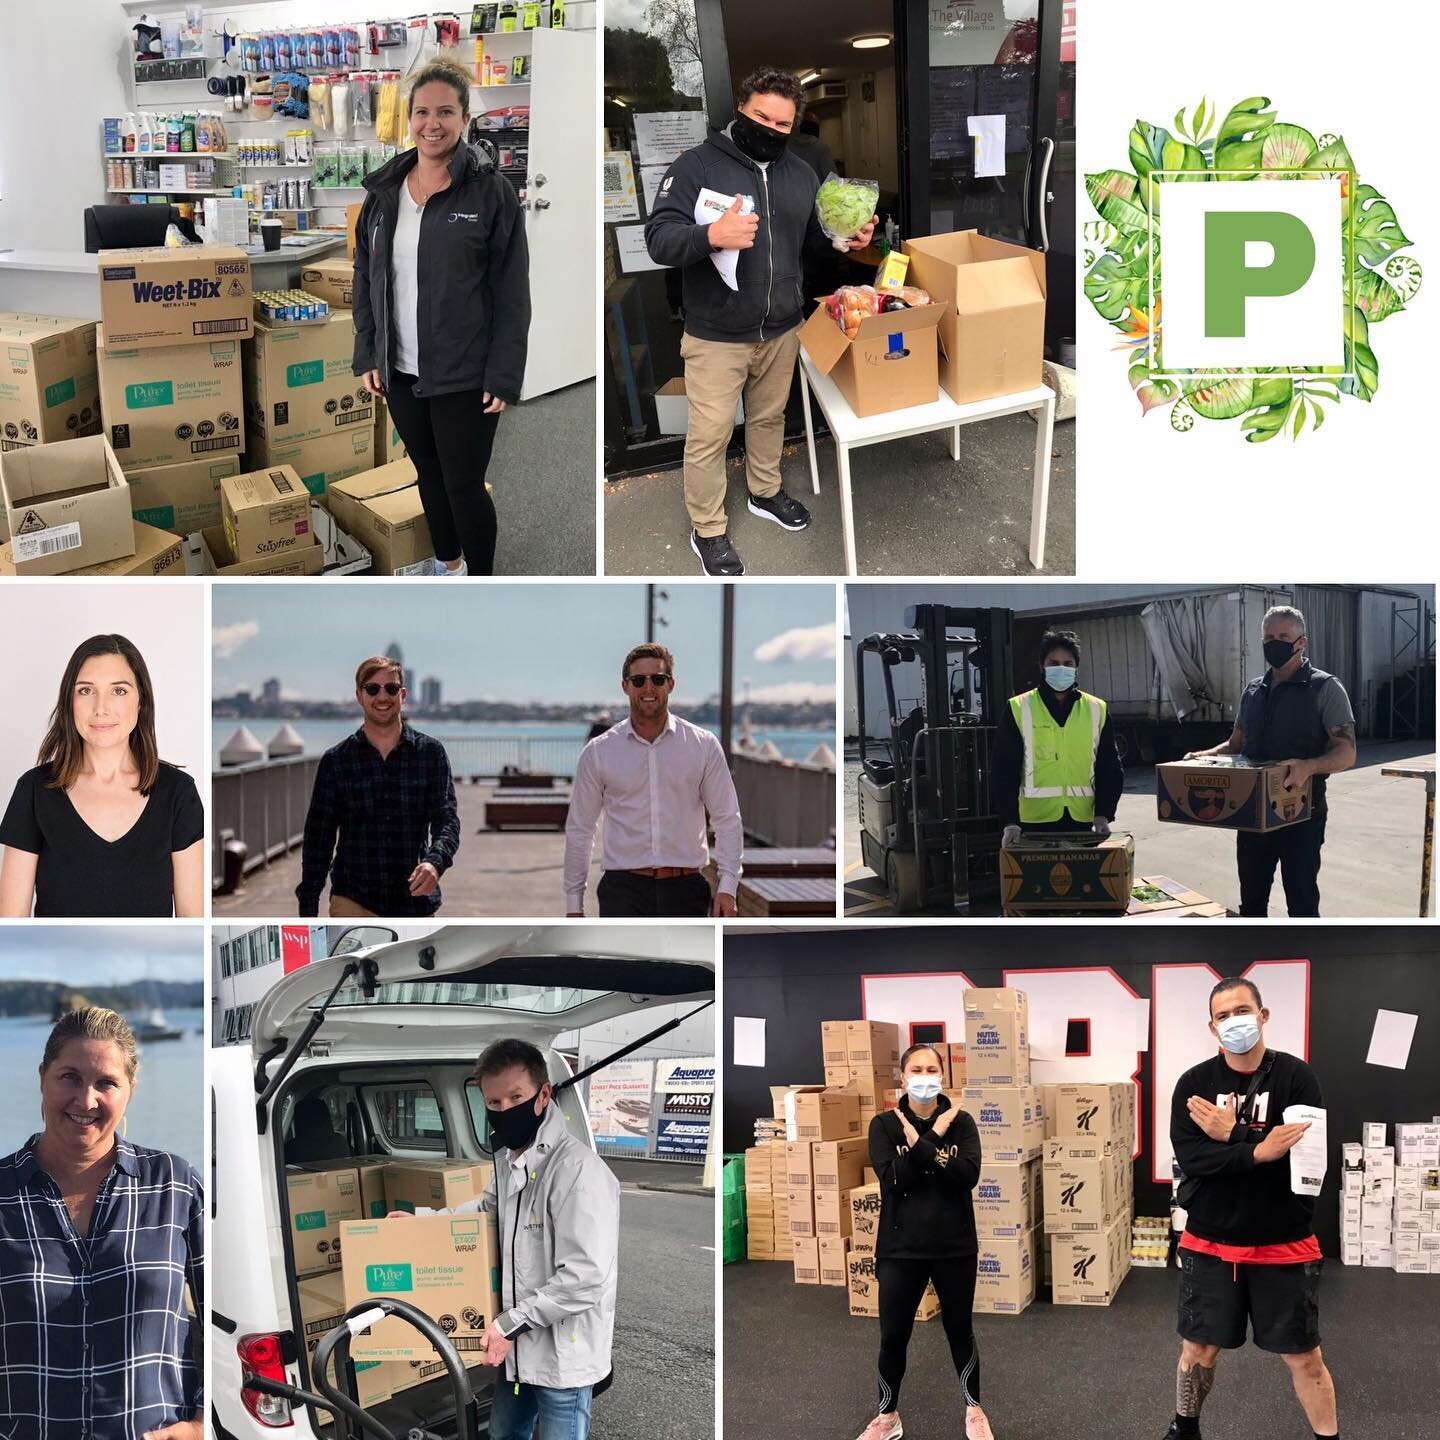 Activation Nourish a great success &ndash; A huge couple of days, which absolutely could not have happened without the help and donations our fabulous supporters.
 
So a massive thank you to&hellip;
 
Hamish and Kane of Yachties of New Zealand
Rob at